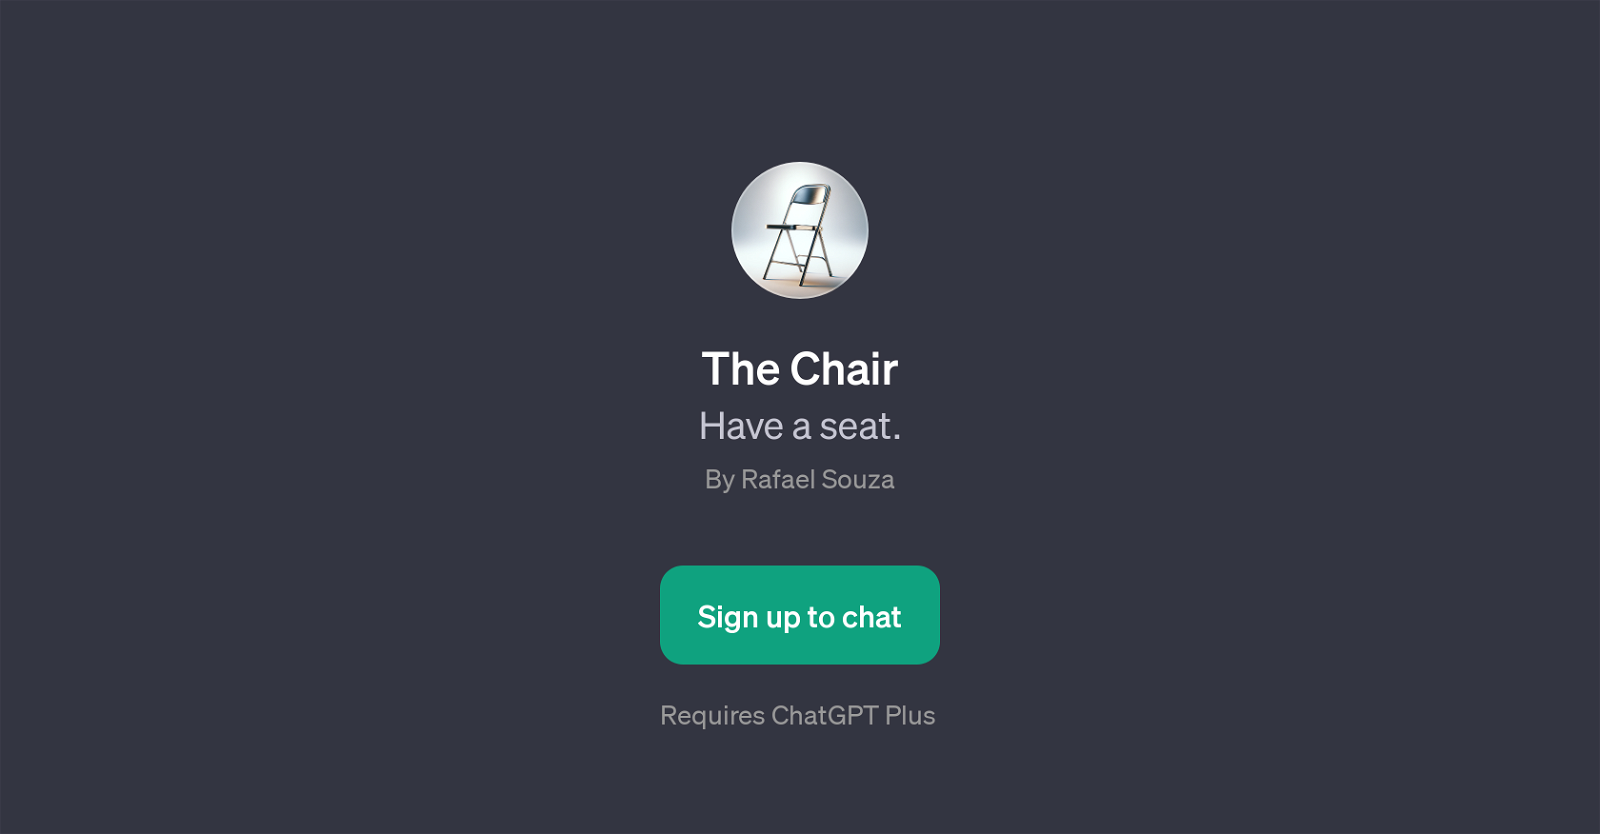 The Chair website